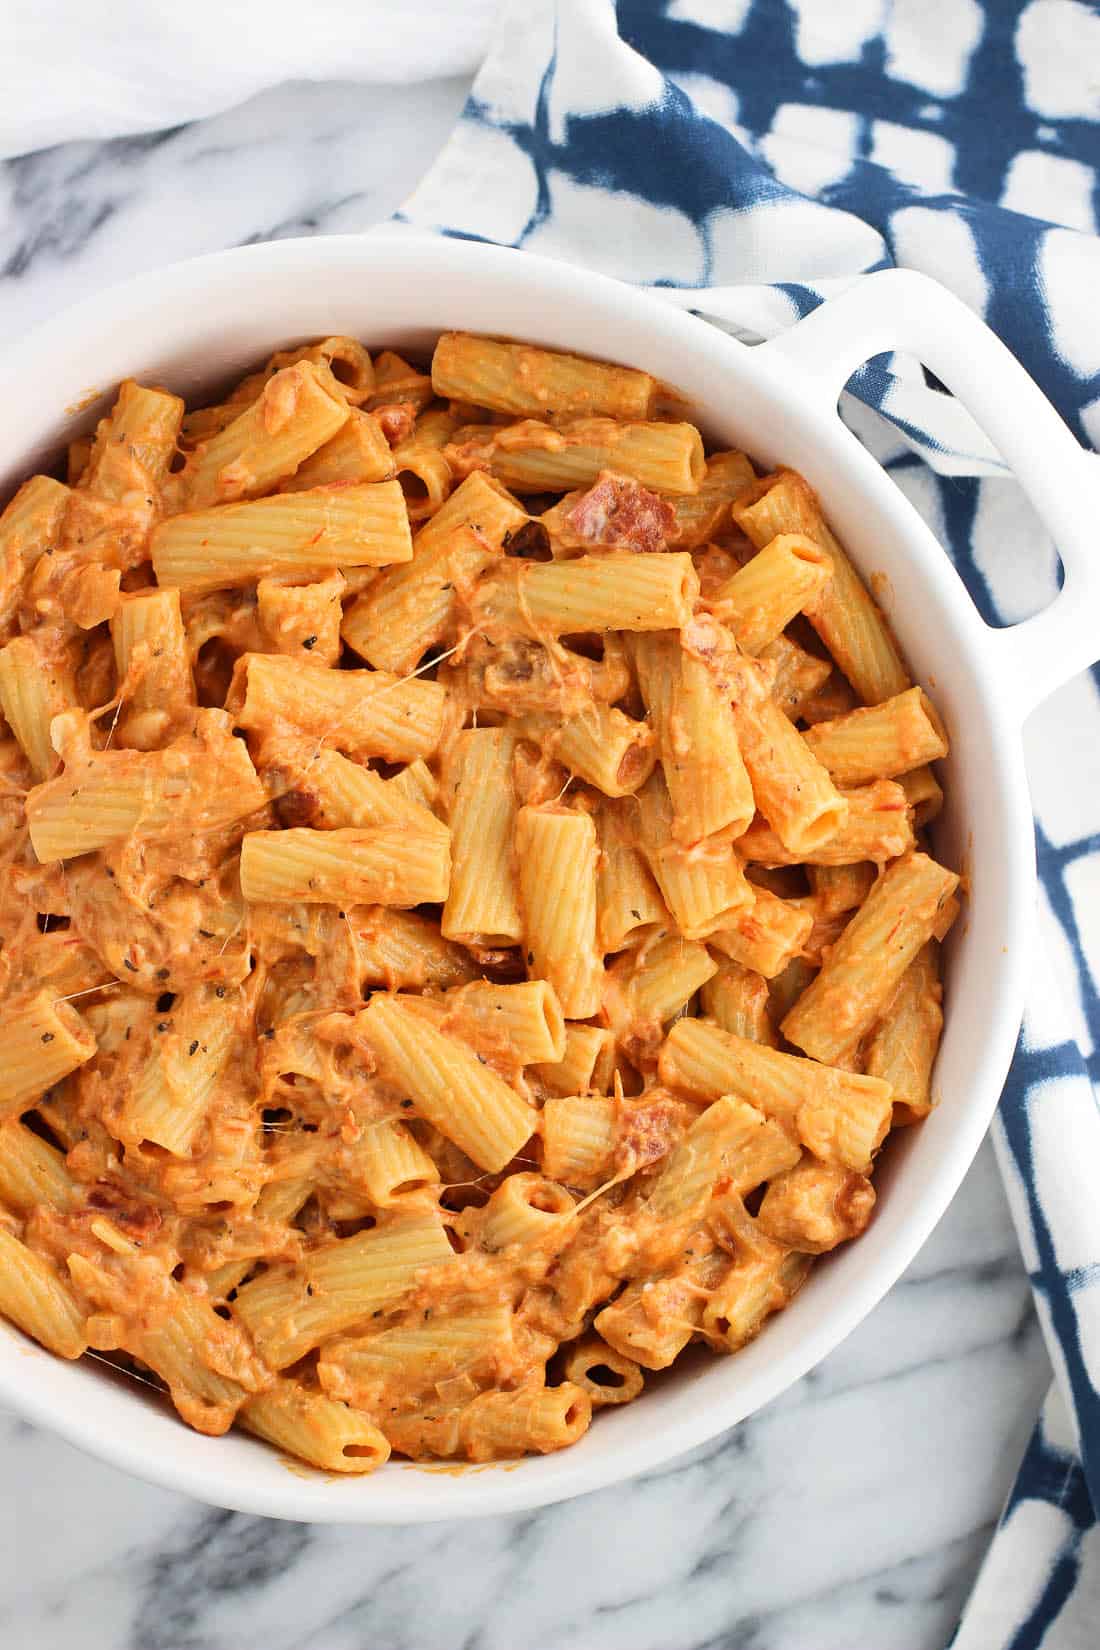 Cooked pasta, sauce, and cheese stirred together in a large dish before baking.